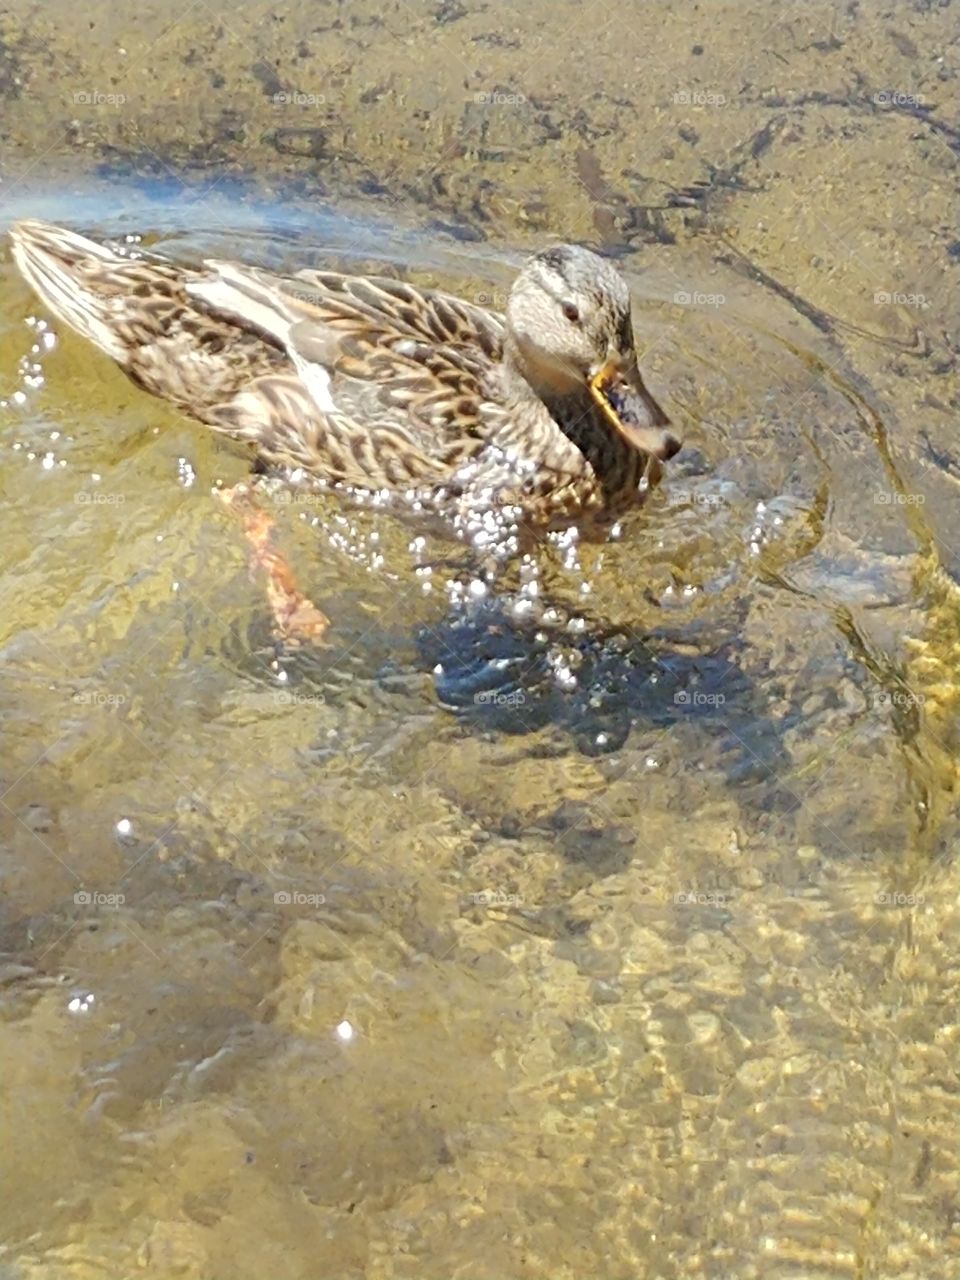 this cute little duck from the other day at the lake. gave her a few crisps cuz she was so polite.